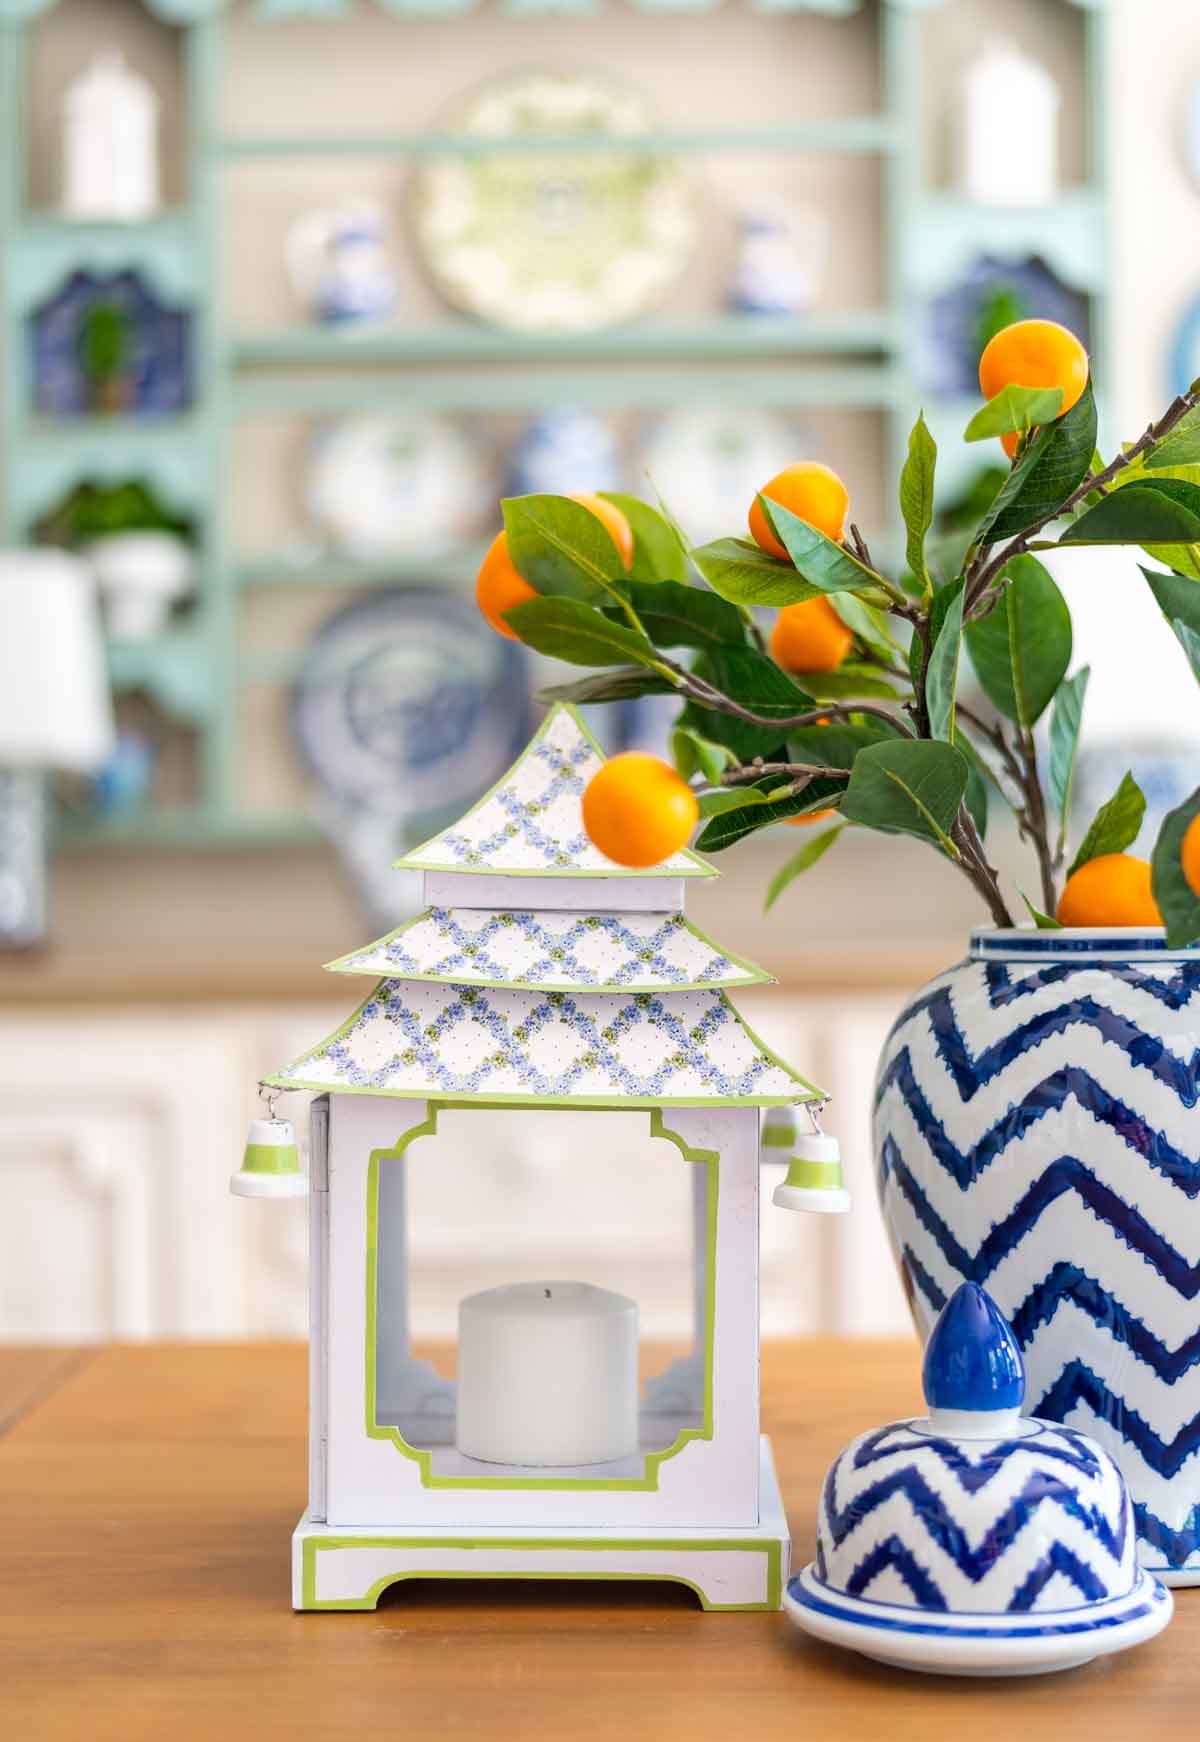 blue and white pagoda shaped lantern and a blue and white vase with faux orange stems on a kitchen table with a decorated plate rack in the background